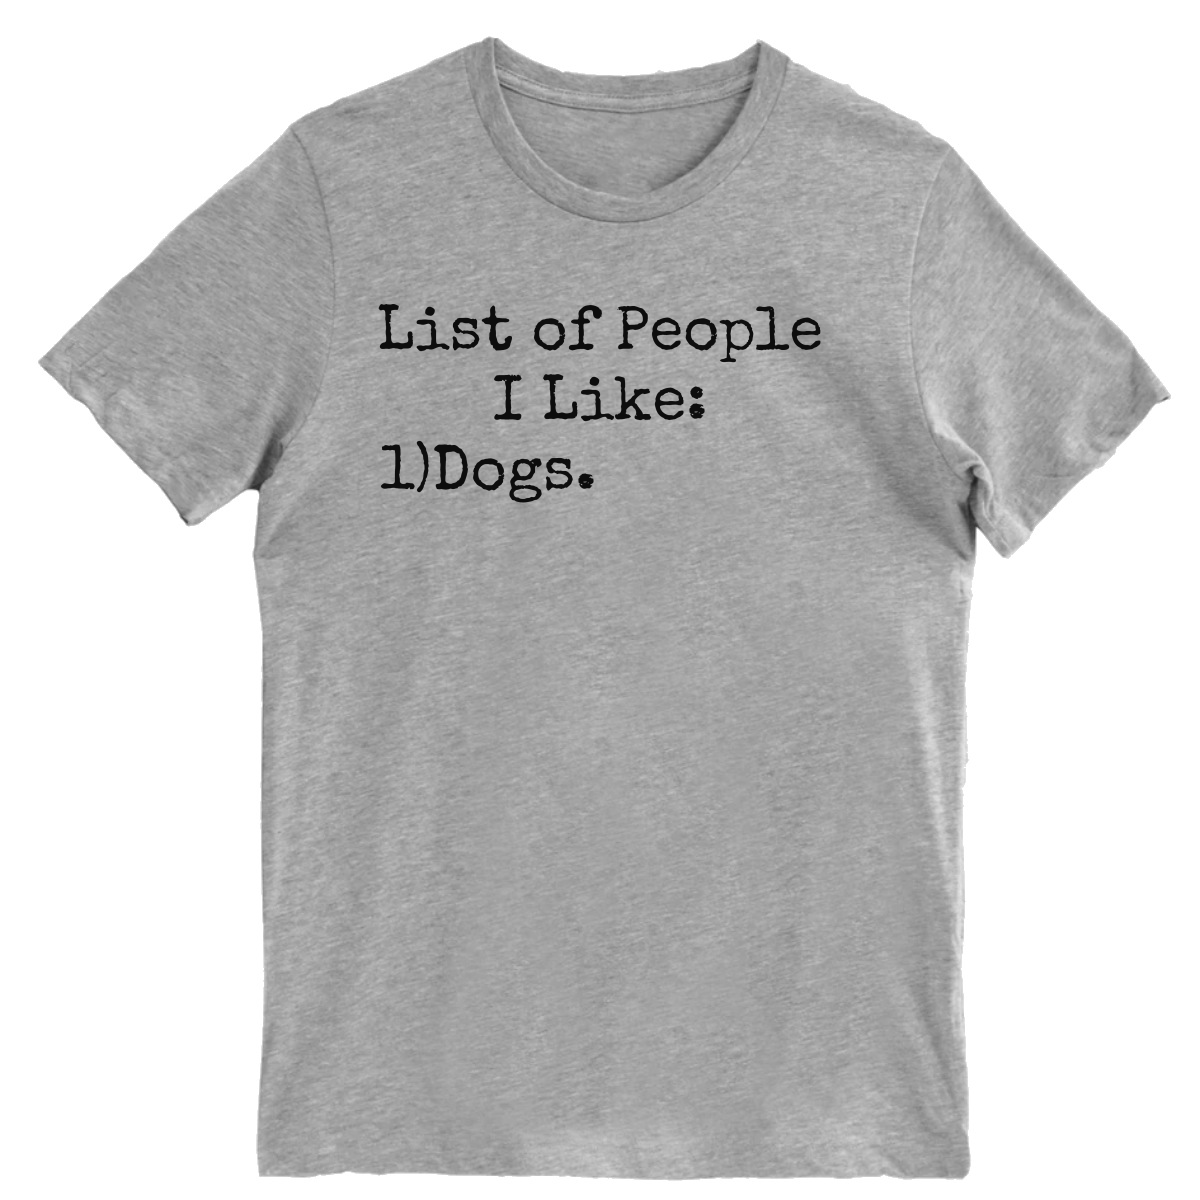 List Of People I Like: Dogs Men's T-shirt | Gray